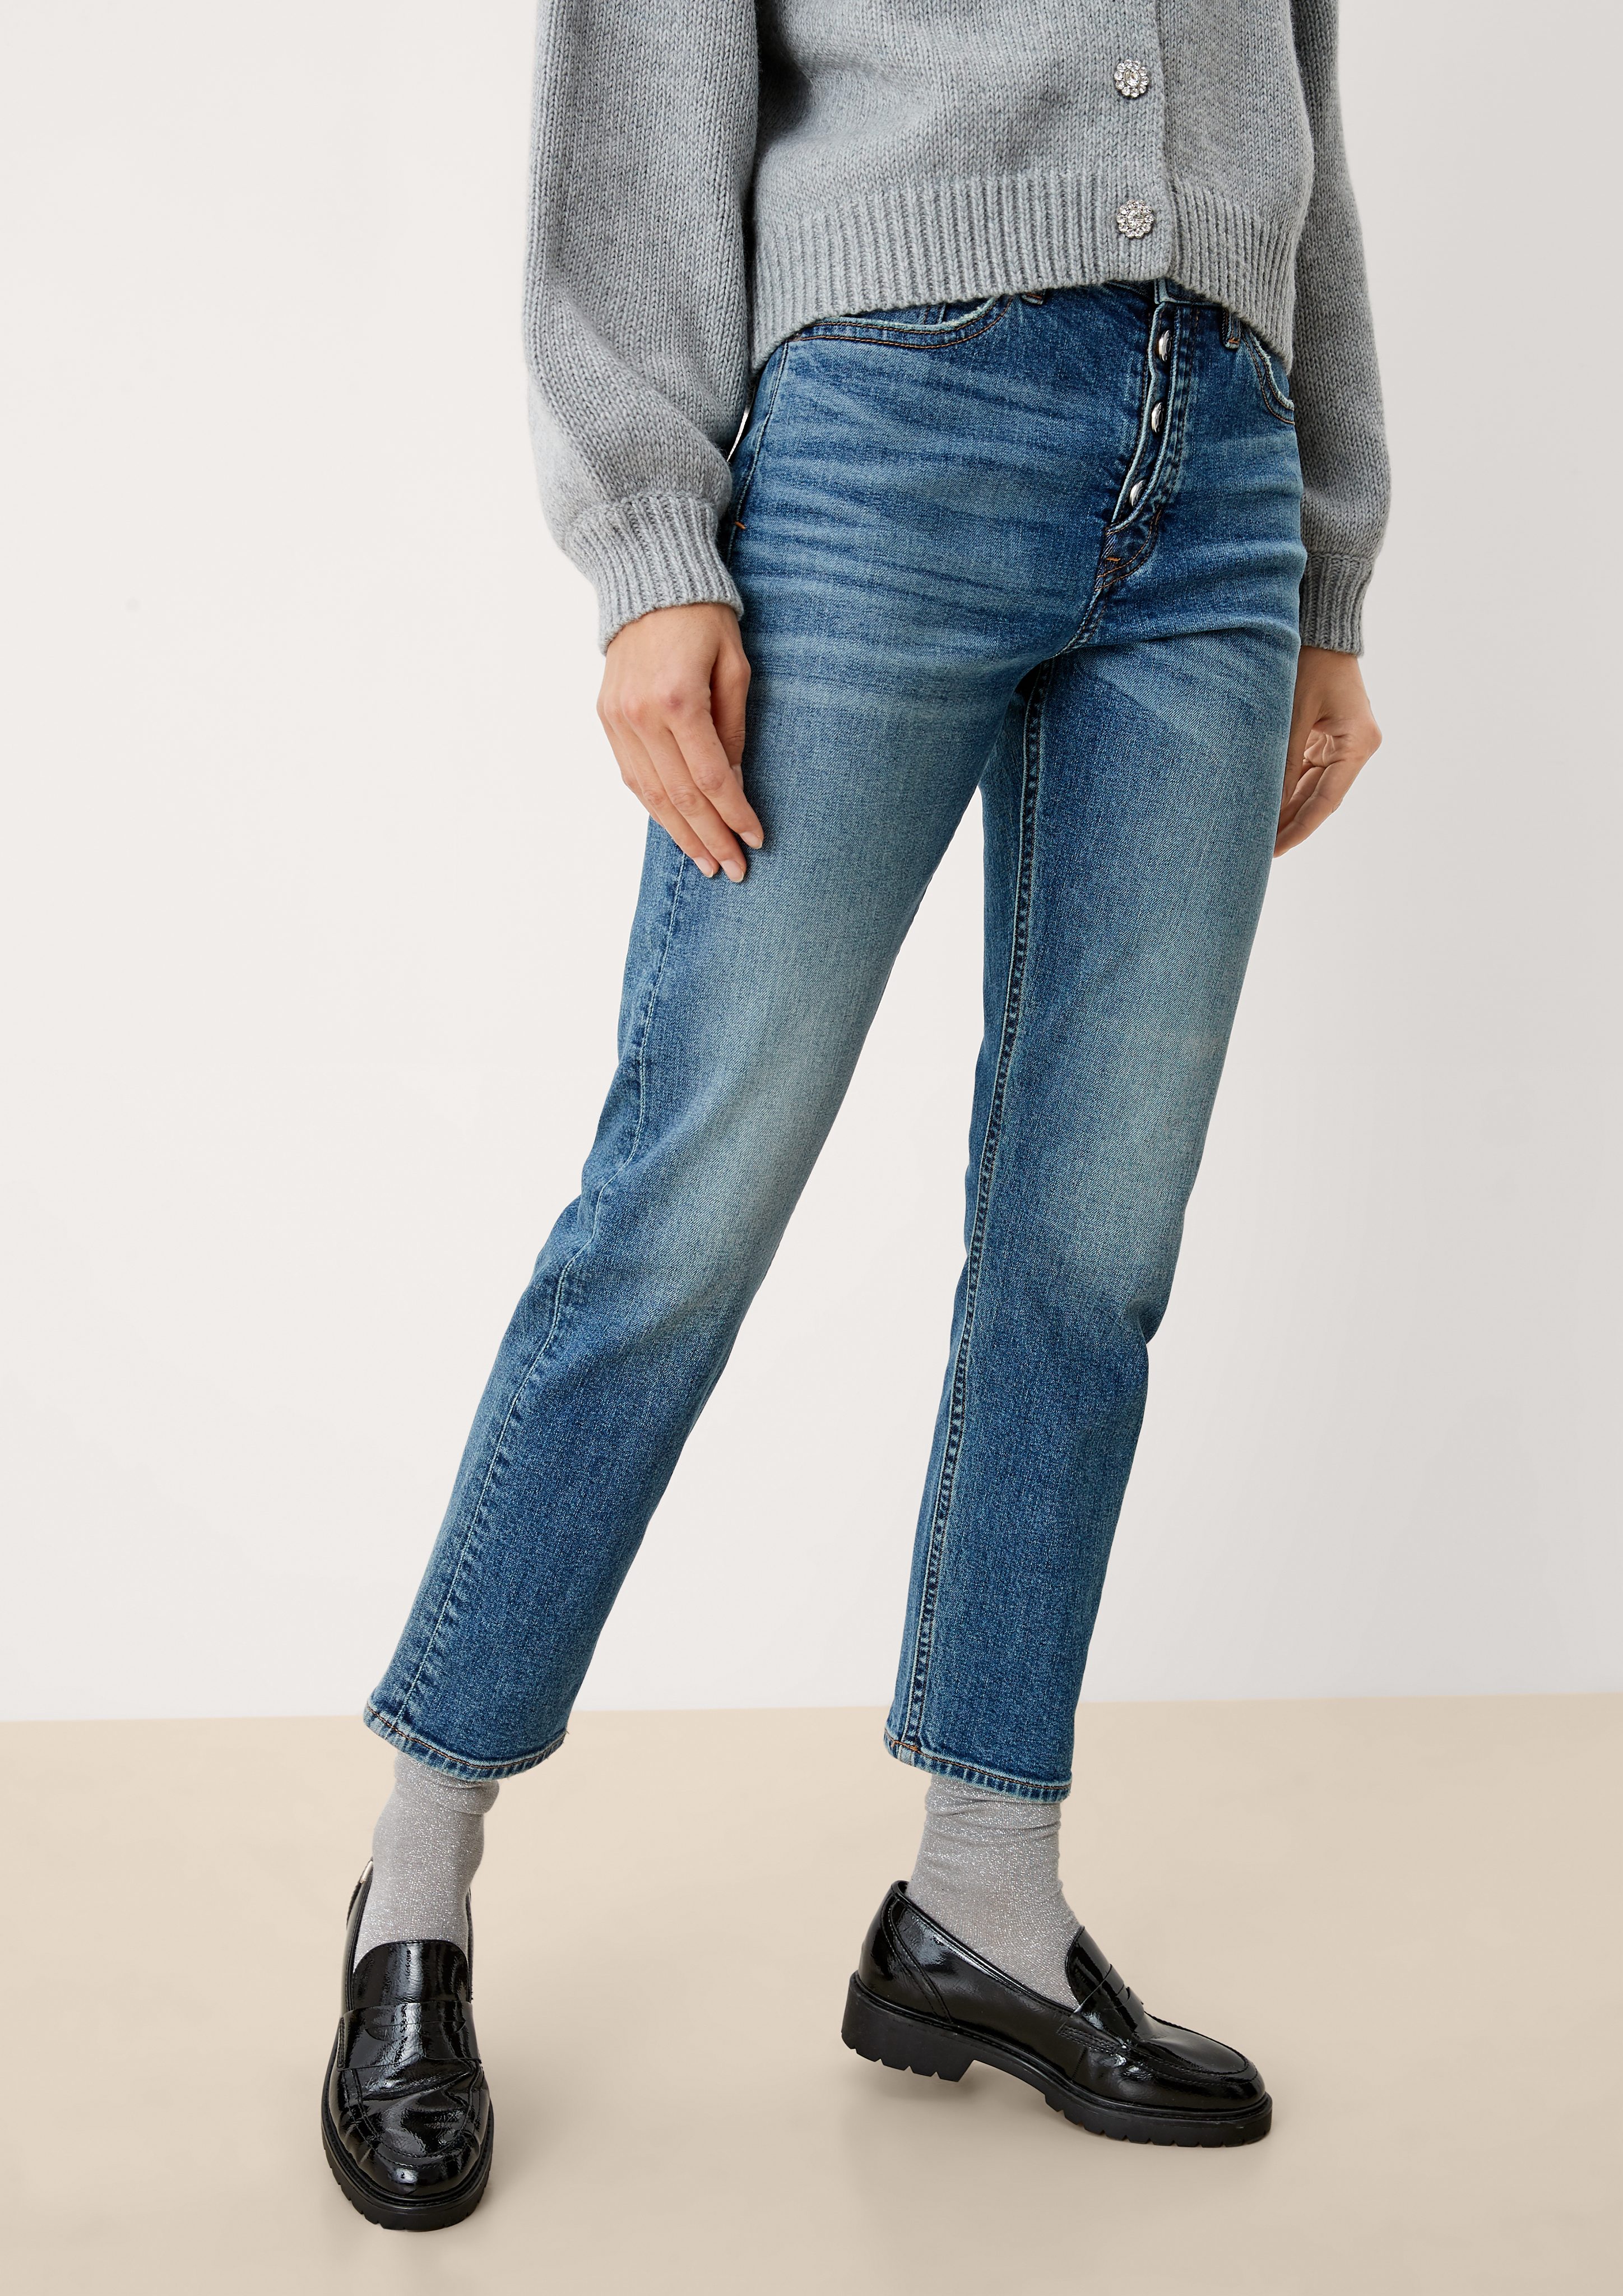 Ankle-Jeans Mid / Franciz / Waschung Fit Tapered Leg s.Oliver / 7/8-Jeans Relaxed Rise